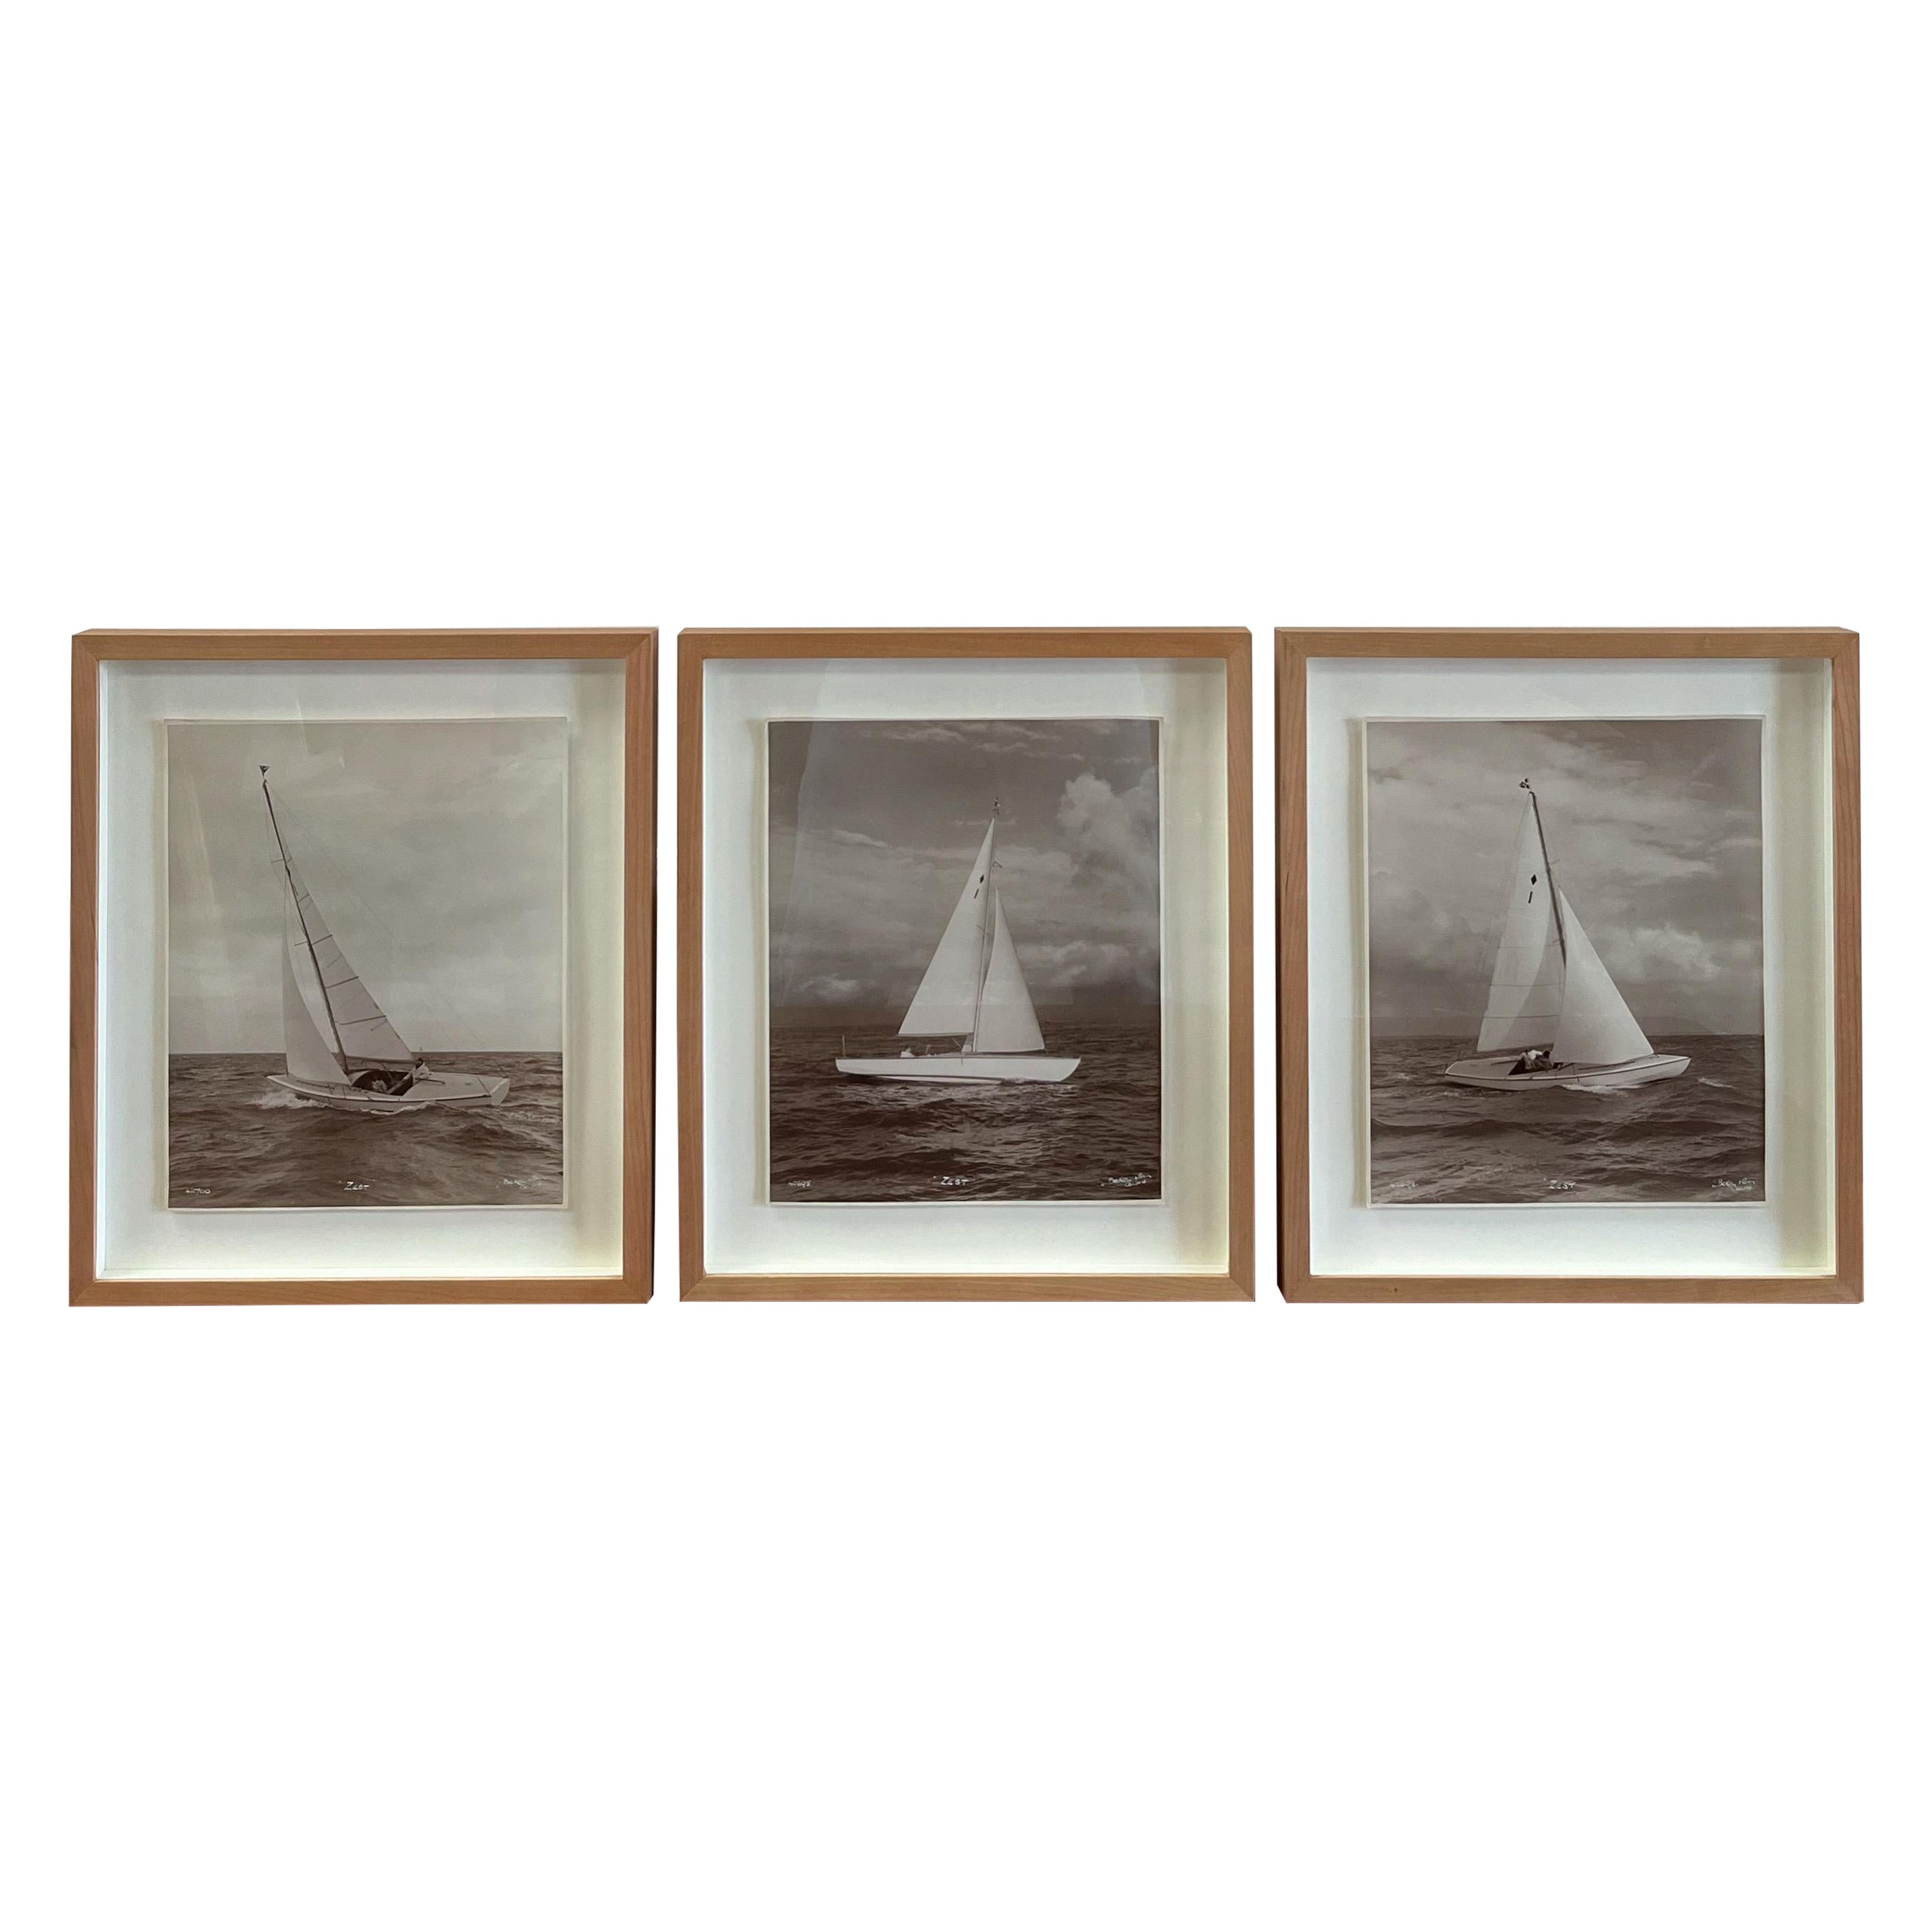 Three Perspectives of ‘Zest’ by Beken of Cowes